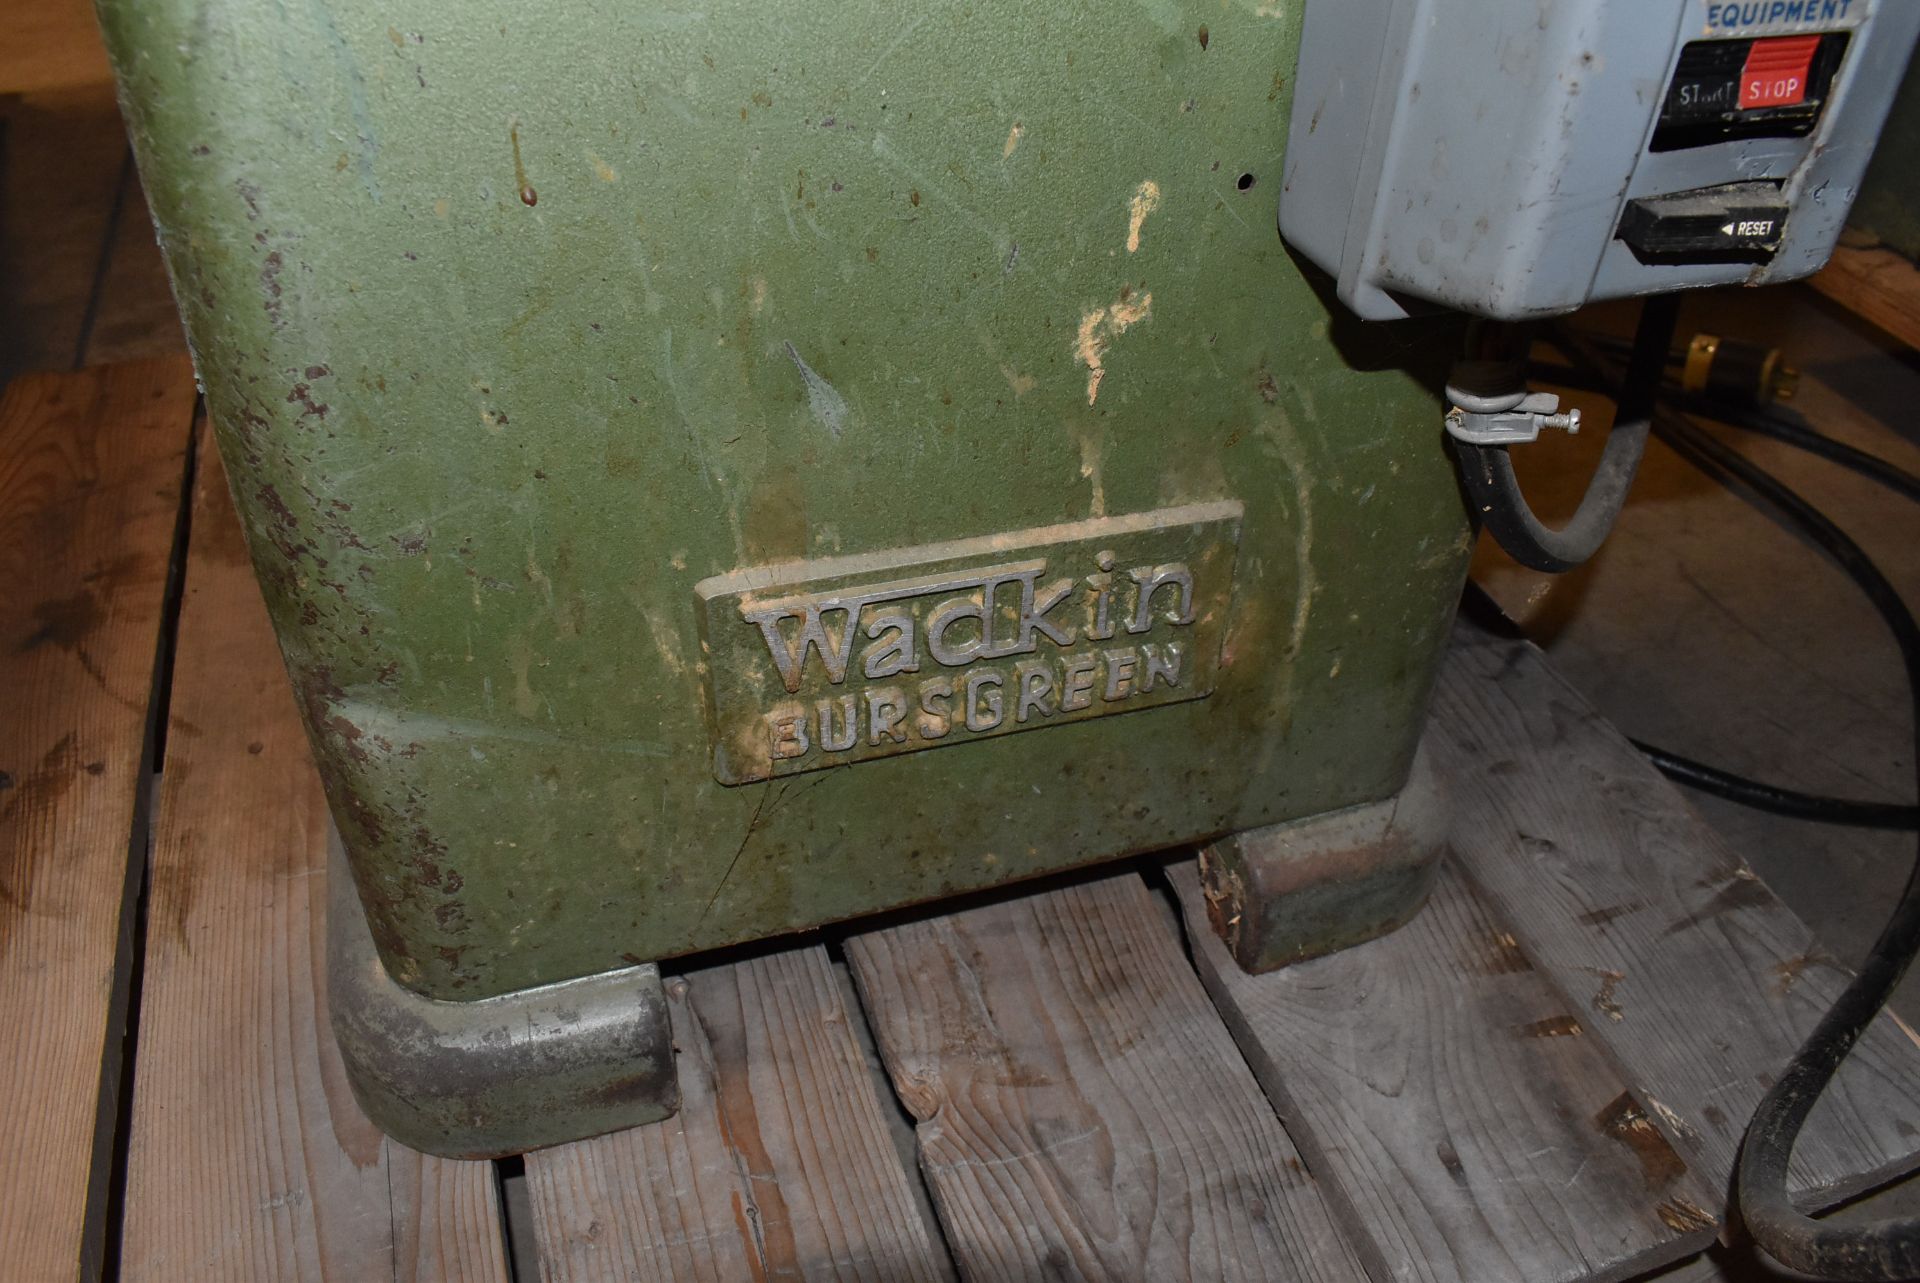 WADKIN BURSGREEN TABLESAW, S/N: N/A [RIGGING FEE FOR LOT #151 - $40 CDN PLUS APPLICABLE TAXES] - Image 5 of 6